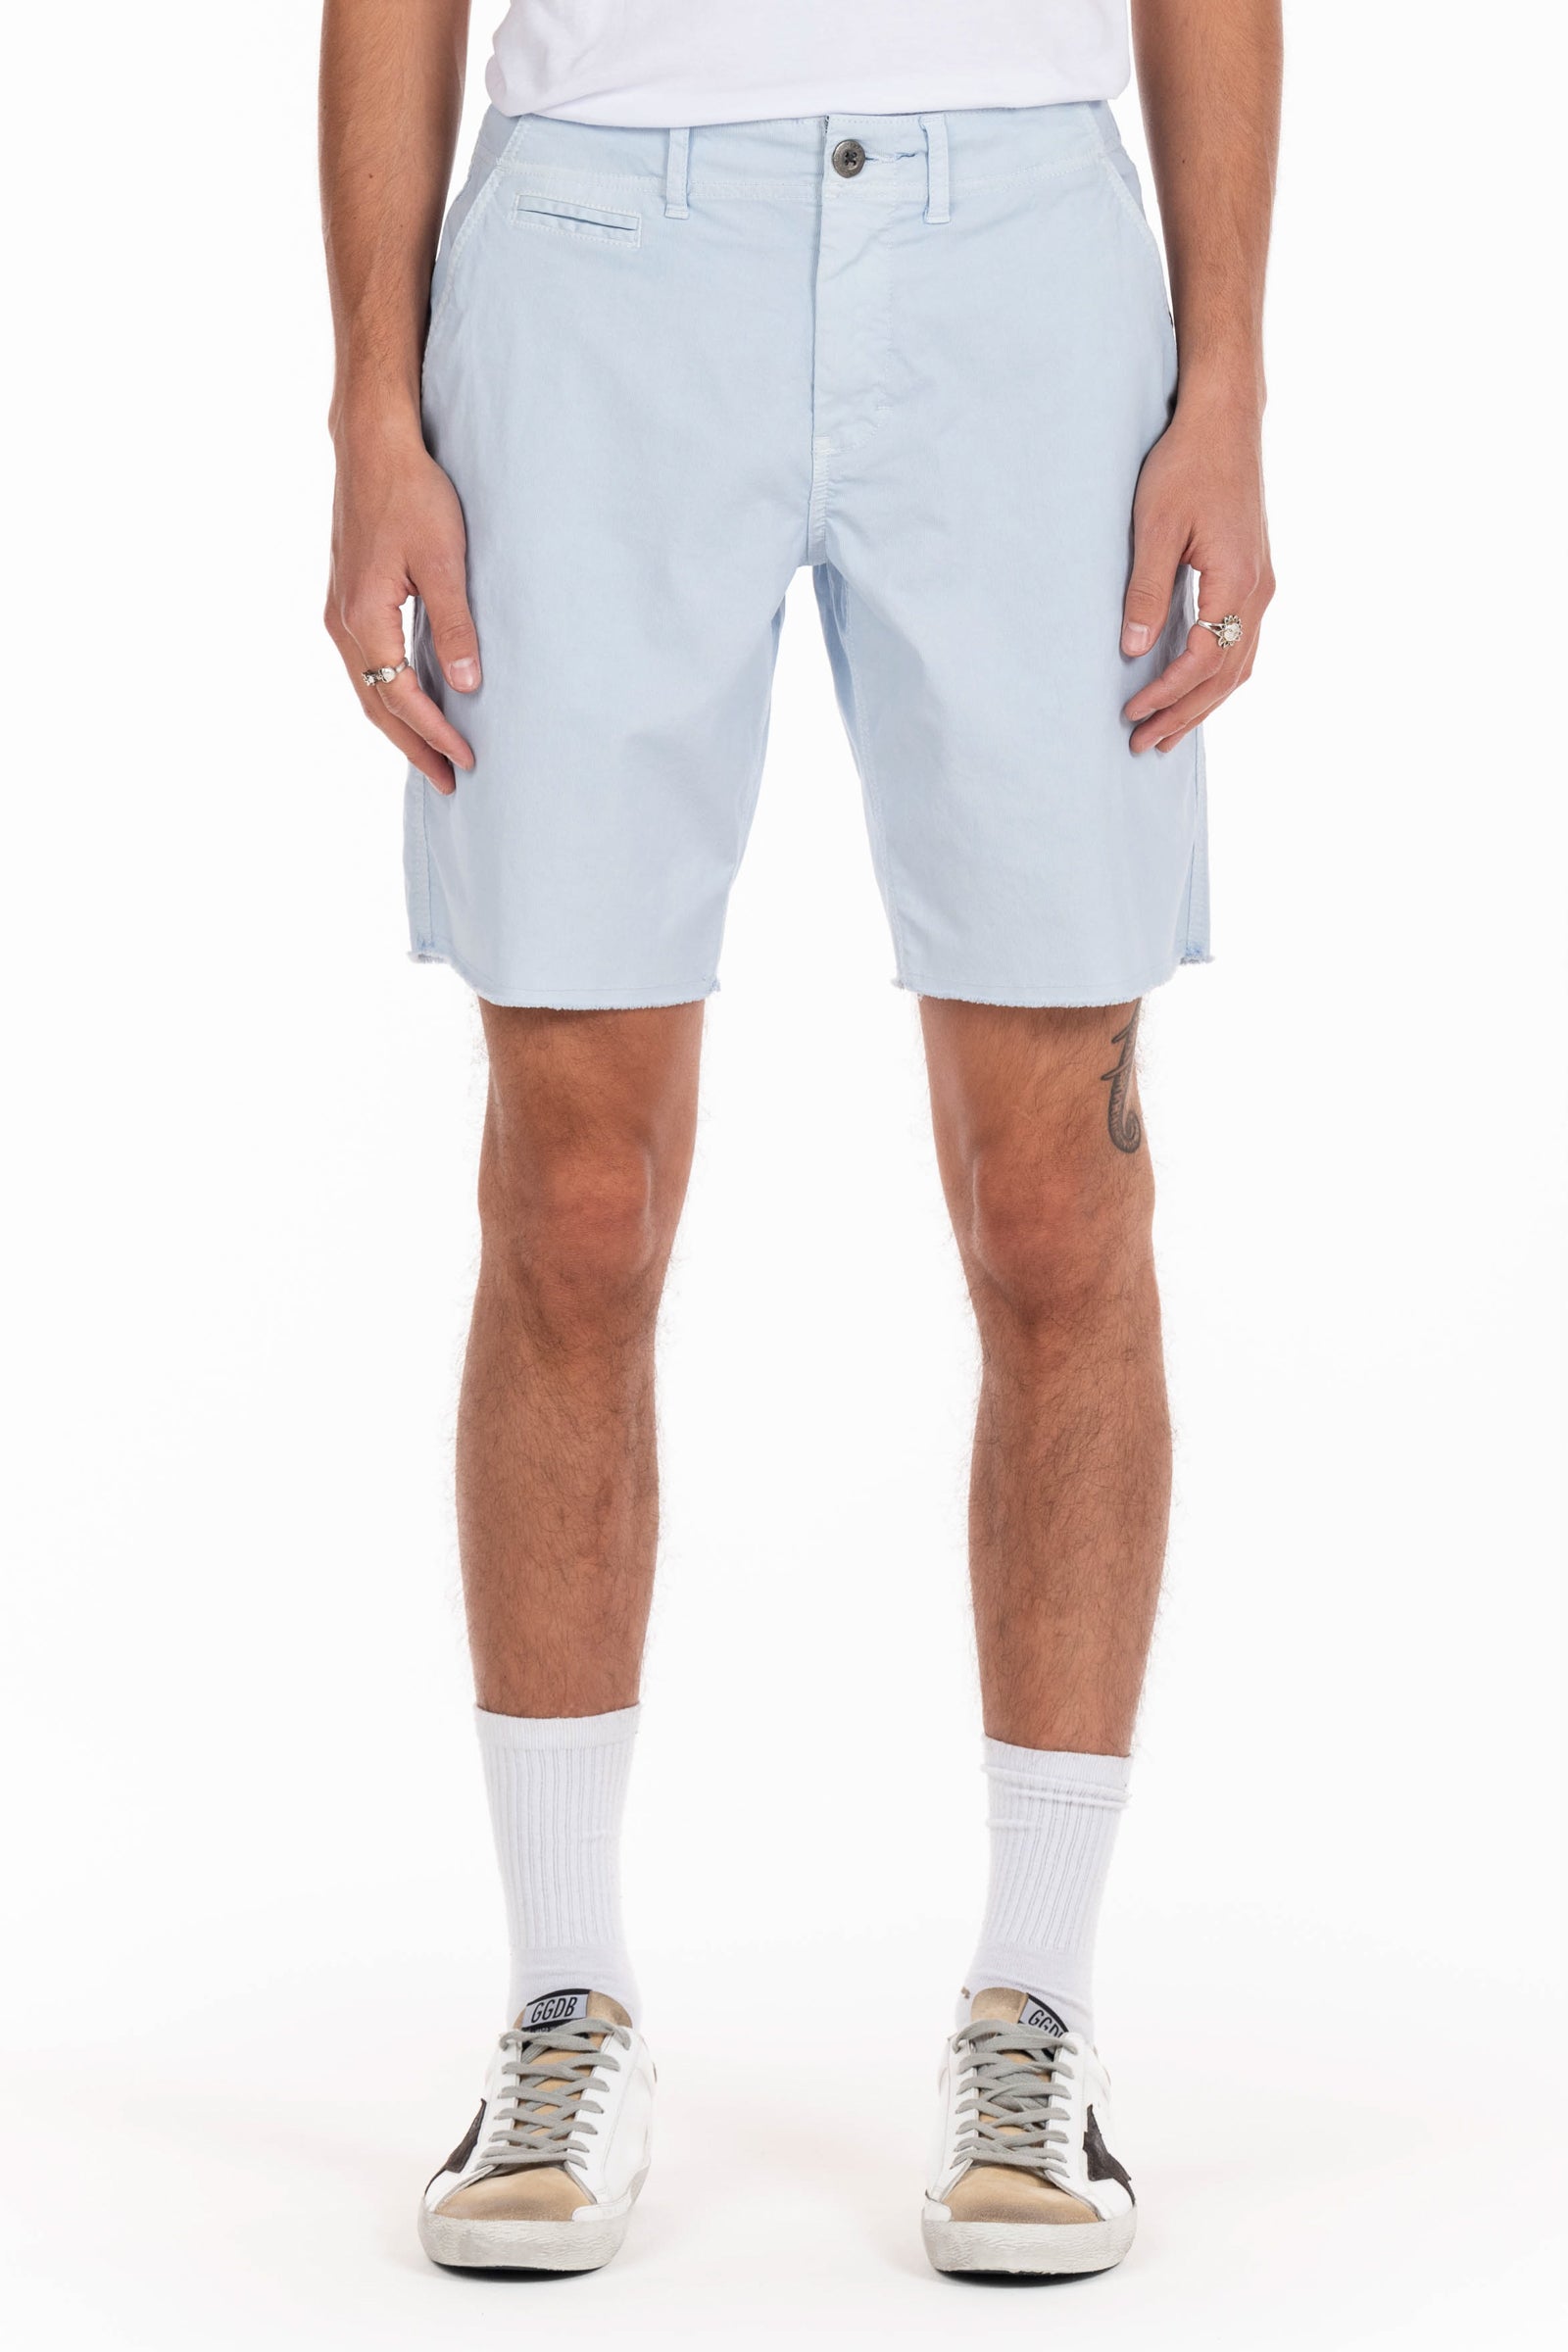 Original Paperbacks Brentwood Chino Short in Waterfall on Model Cropped Front View